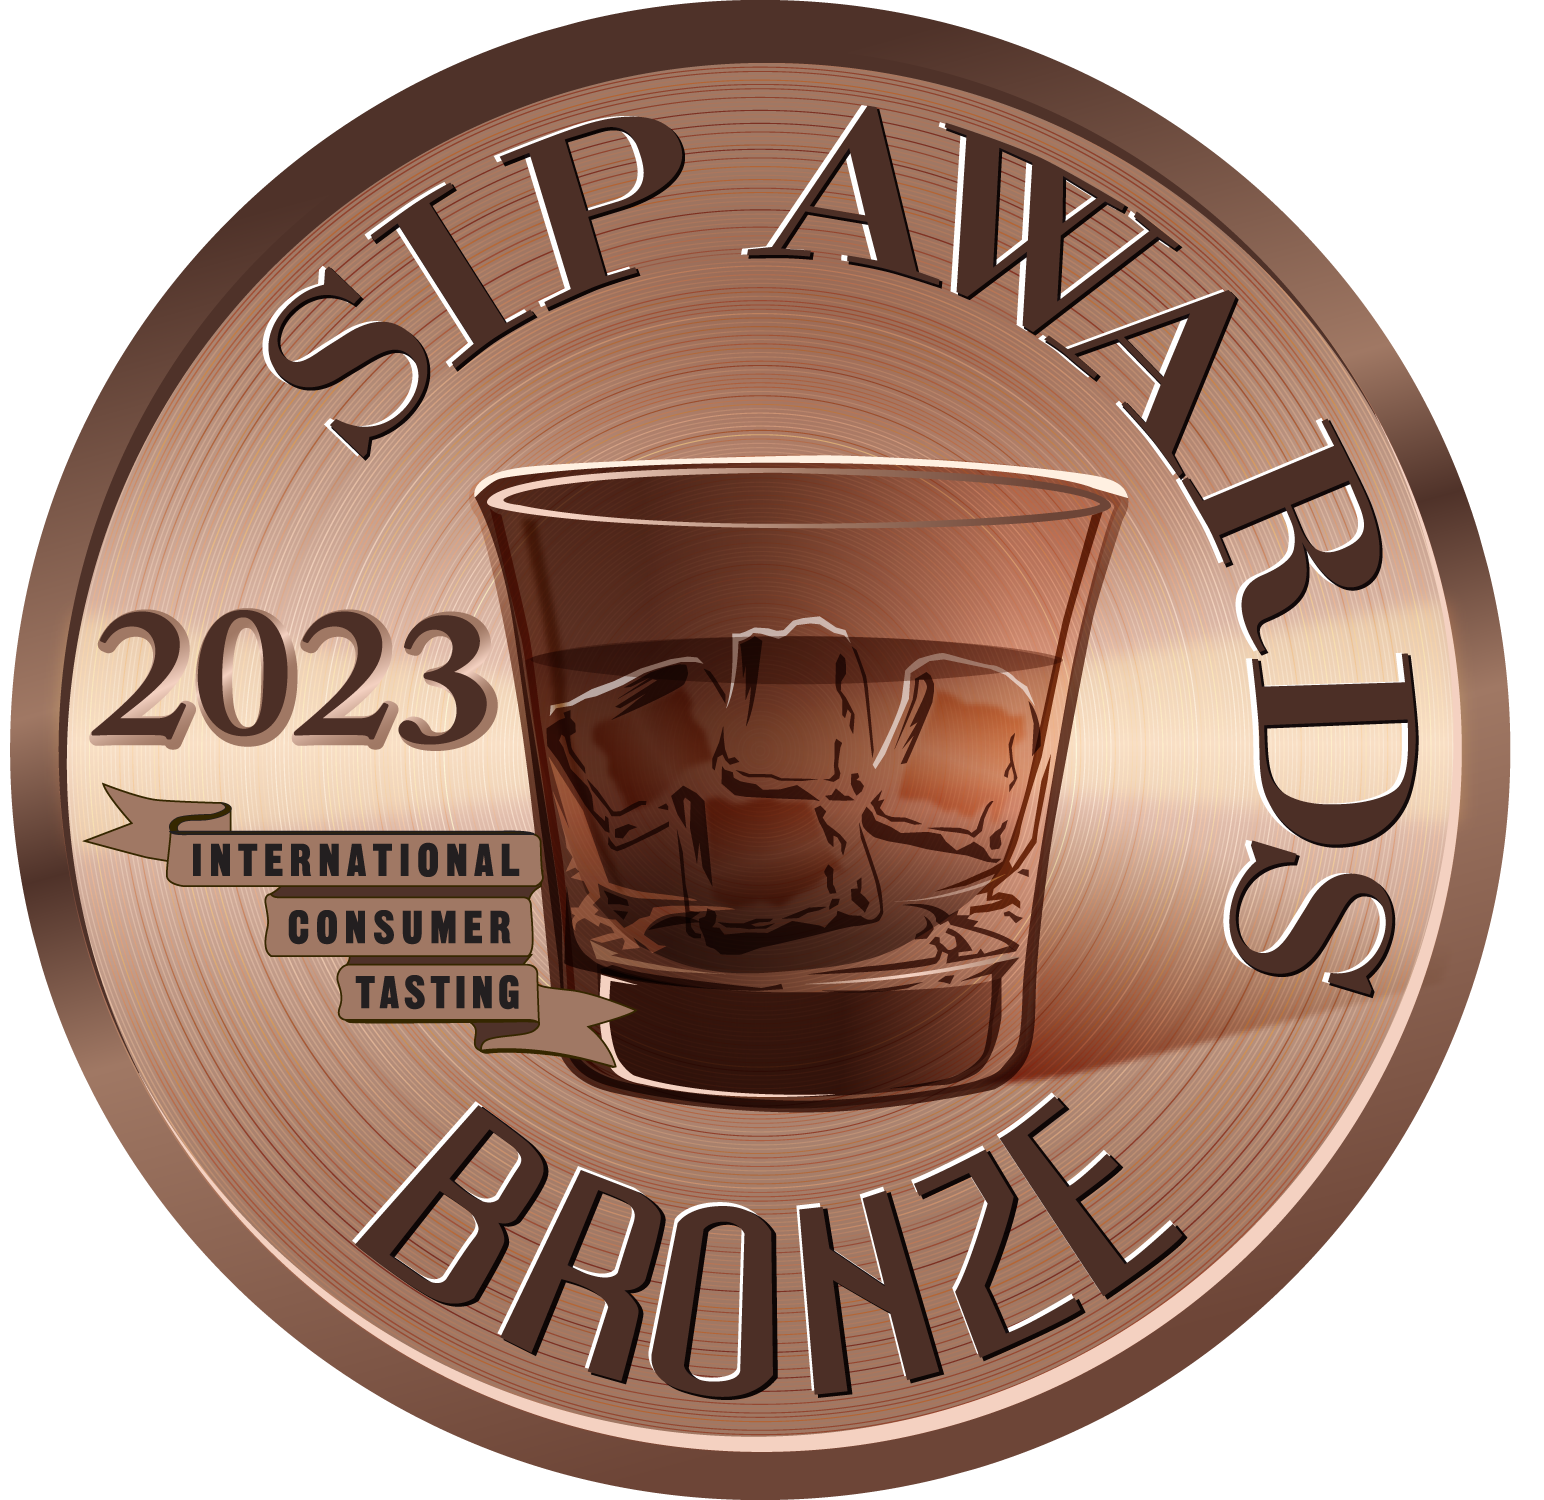 Mixoloshe won the Sip Awards Bronze Medal in 2023